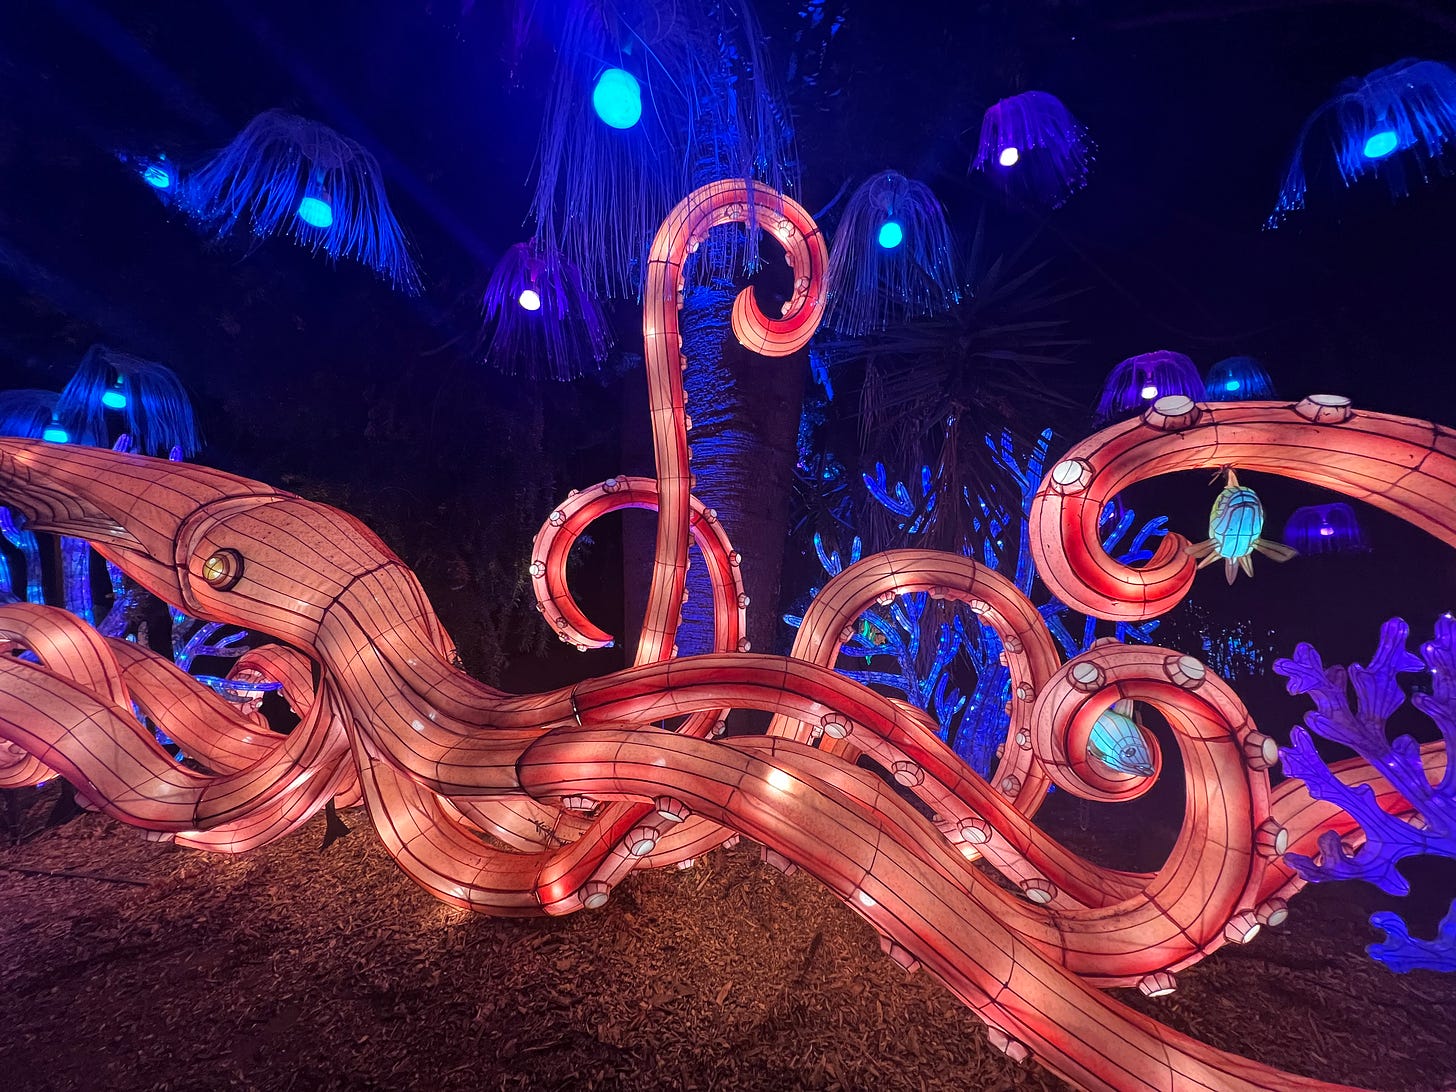 A giant squid sculpture, made from textiles and rope lights. Lit from within it's pink skin glows!